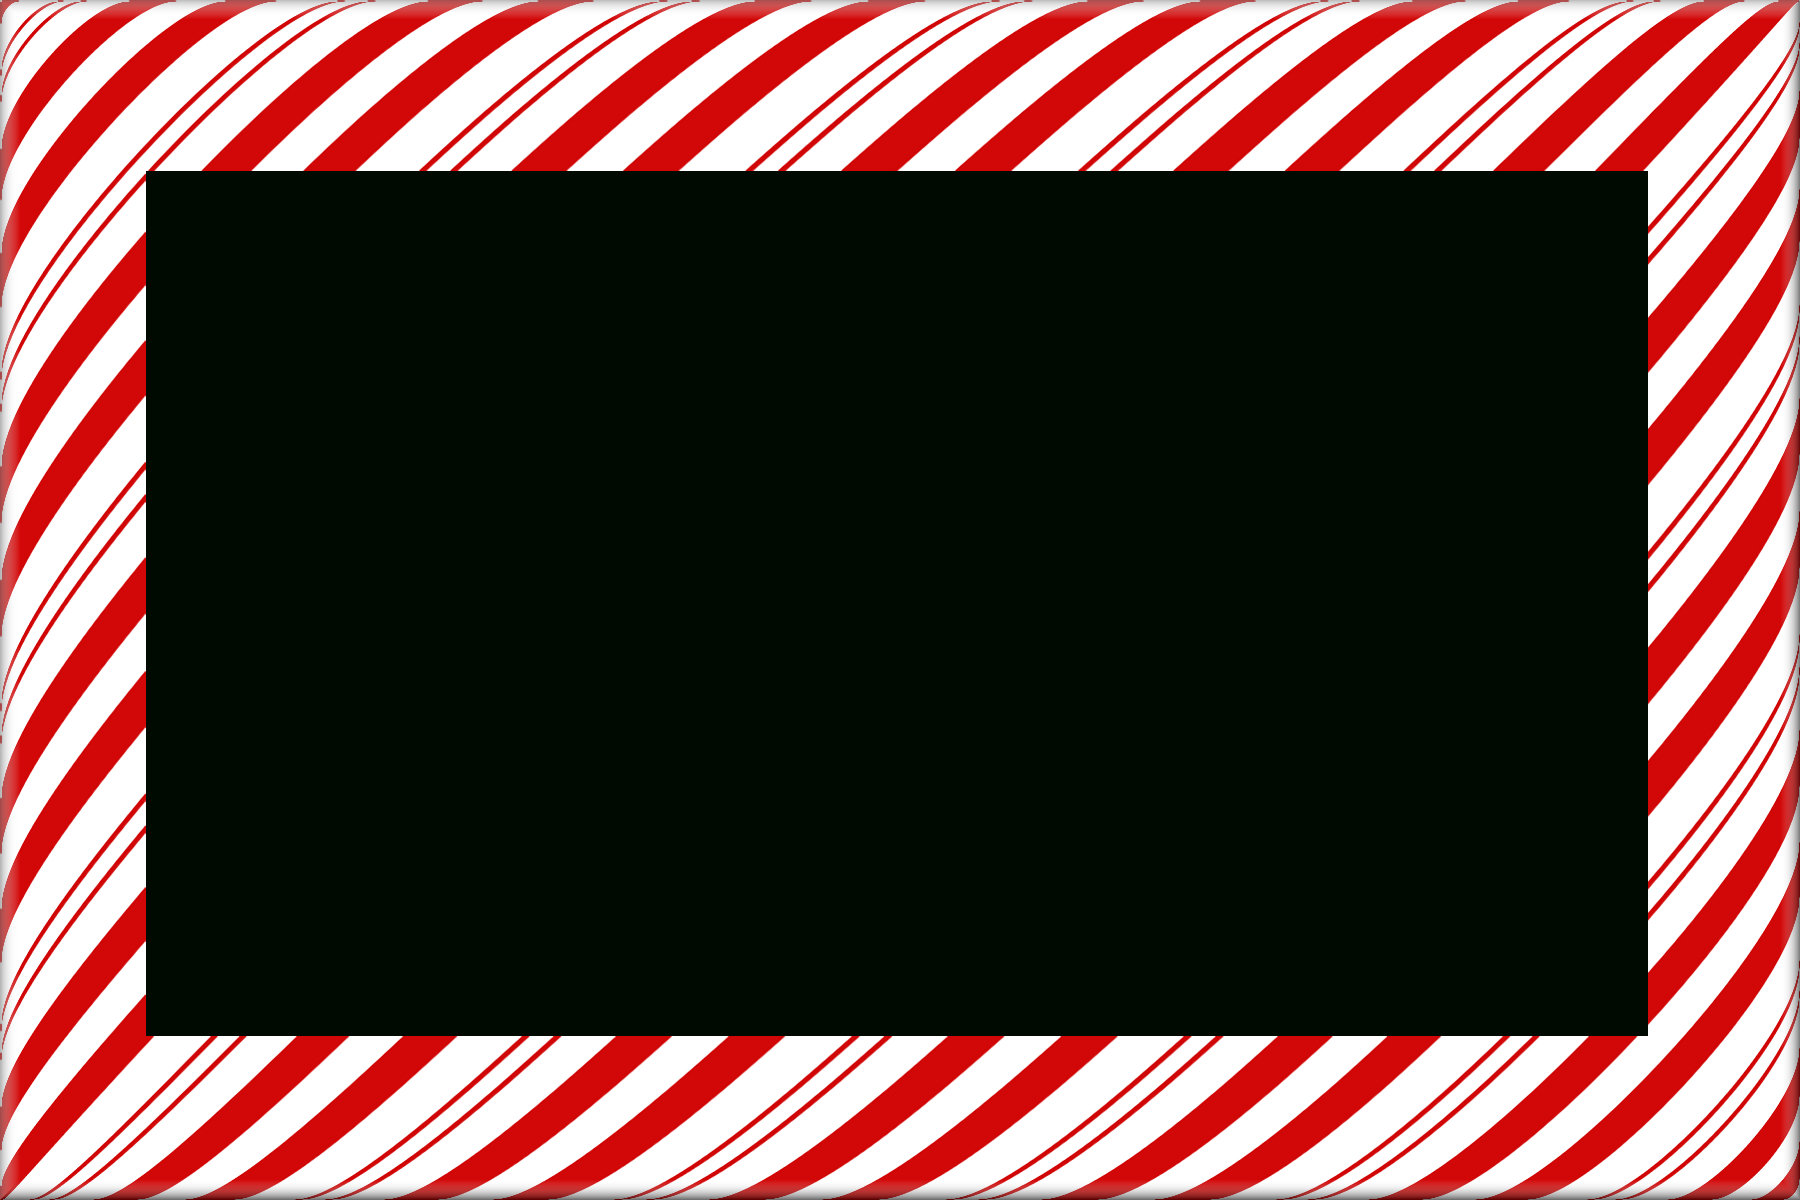 free-candy-cane-template-printable-free-printable